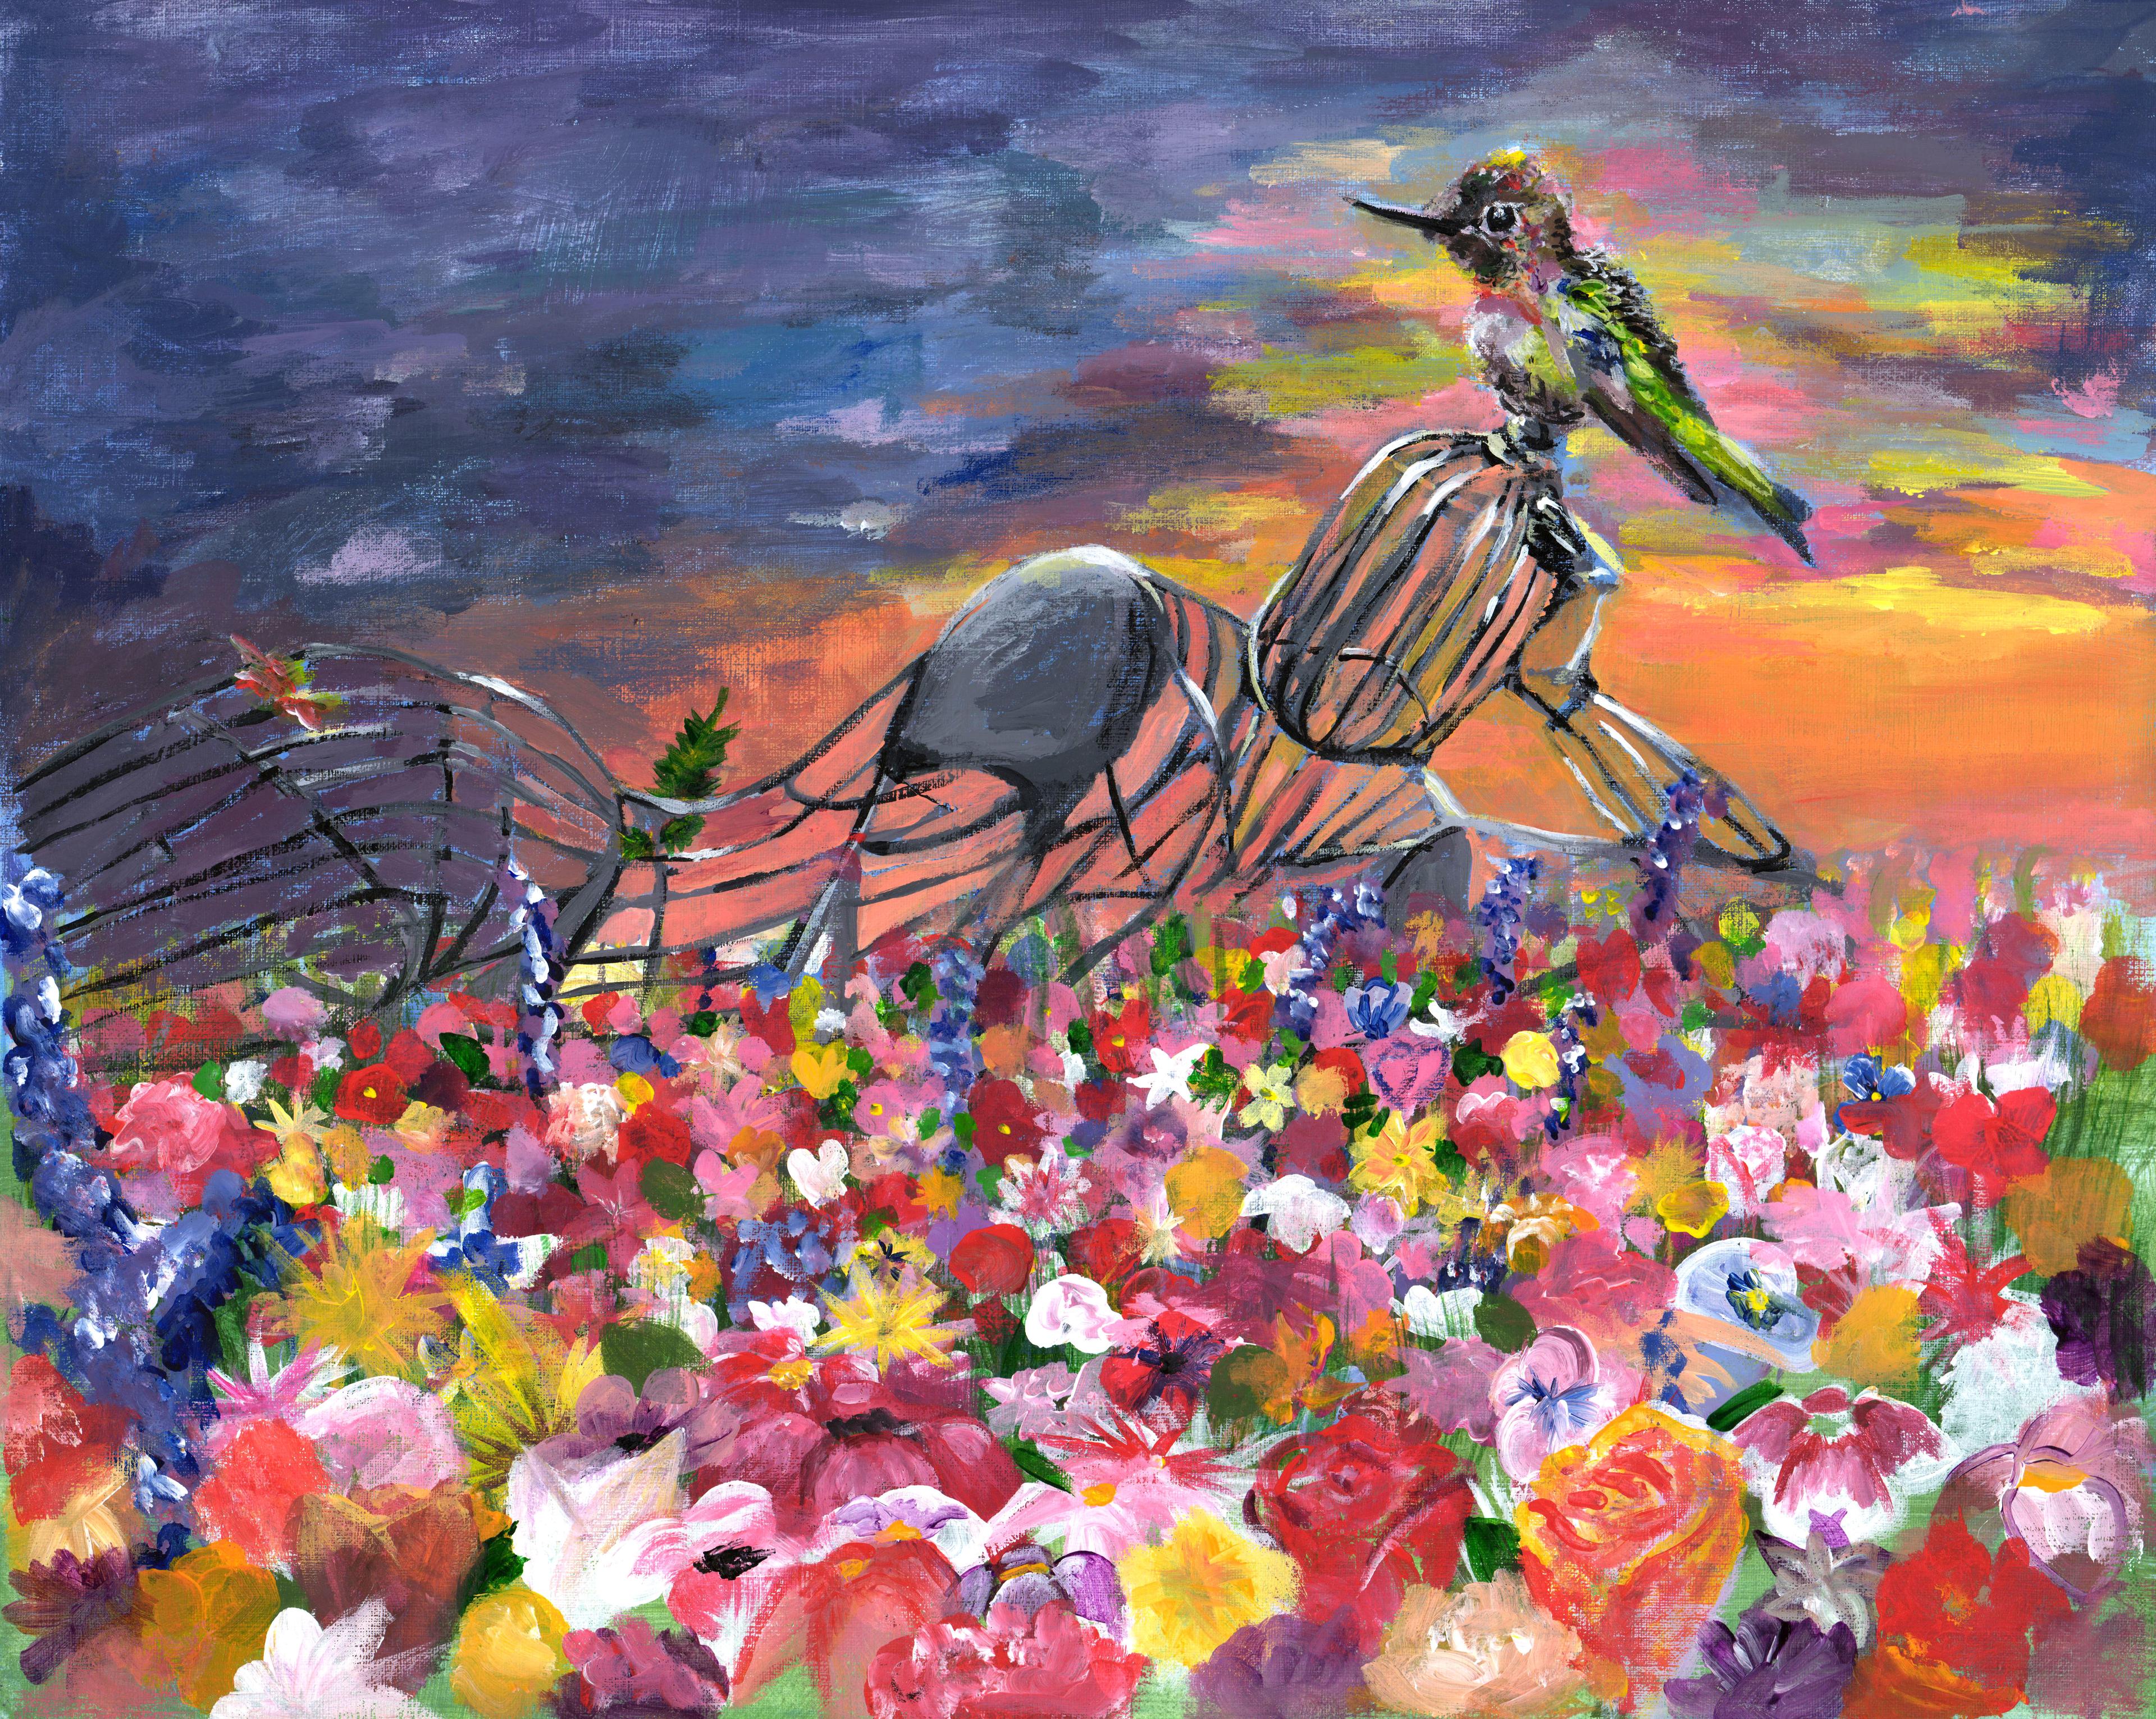 Acrylic painting of a small yellow and black bird facing left, perched atop the broken, warped, stretched remnants of an opened birdcage that sits on a large field covered in flowers of many colors. The sky above is dark blue at the top, changing to a sunrise orange behind the perched bird.